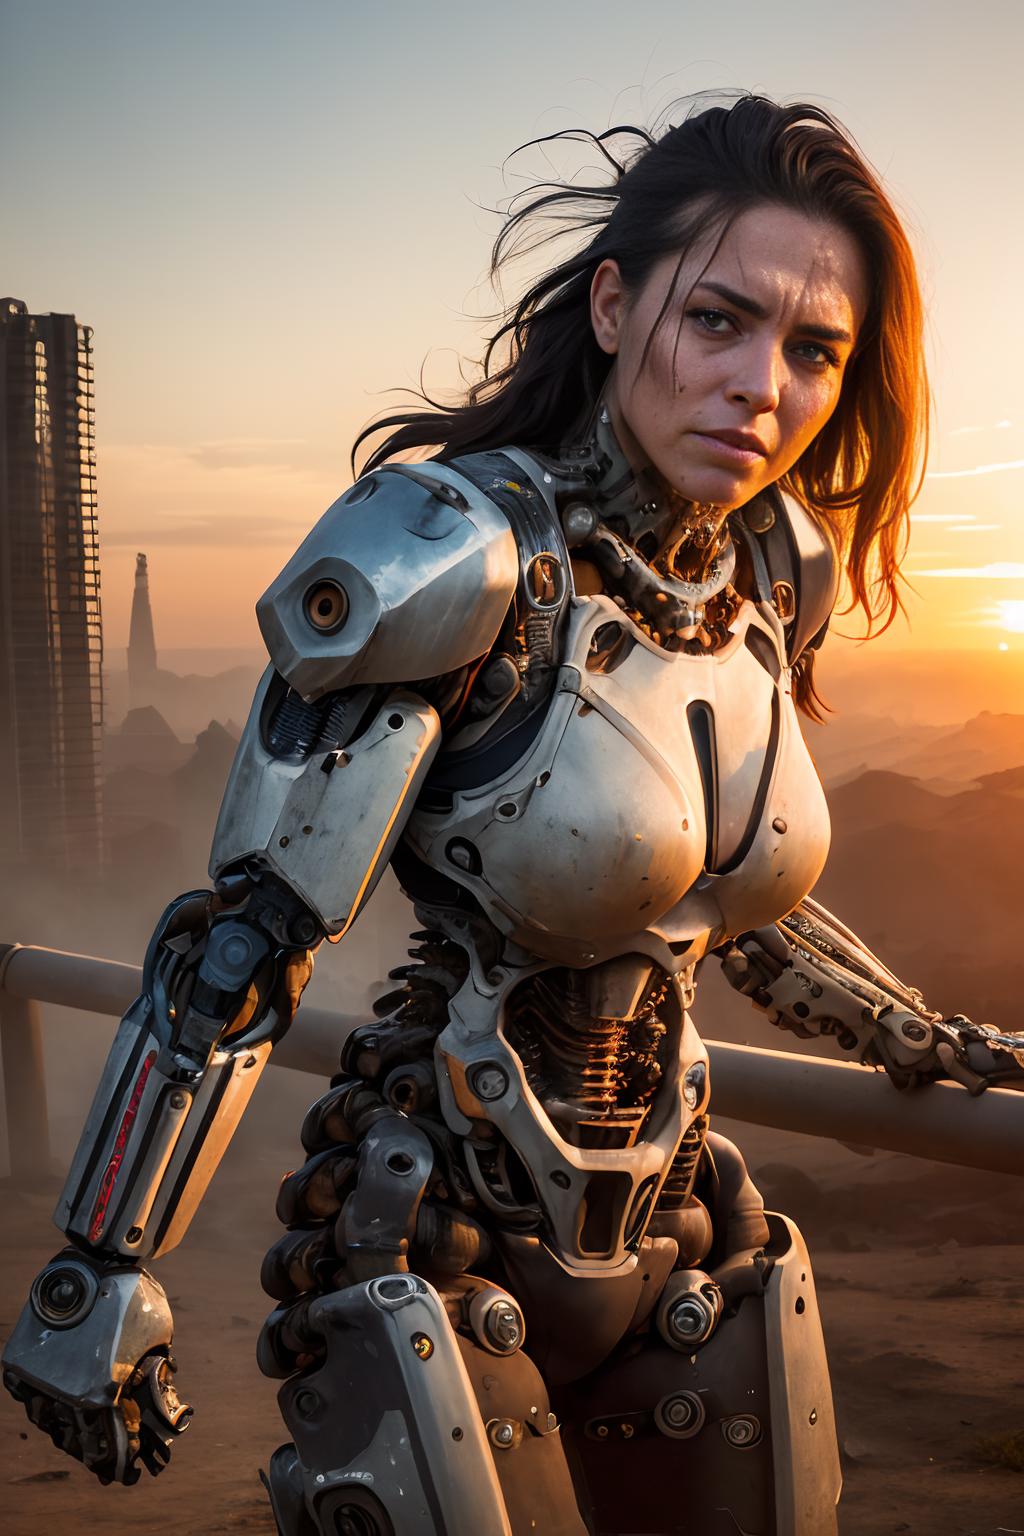 A Cyborg Woman with Glowing Eyes Stands in a Futuristic Scene.